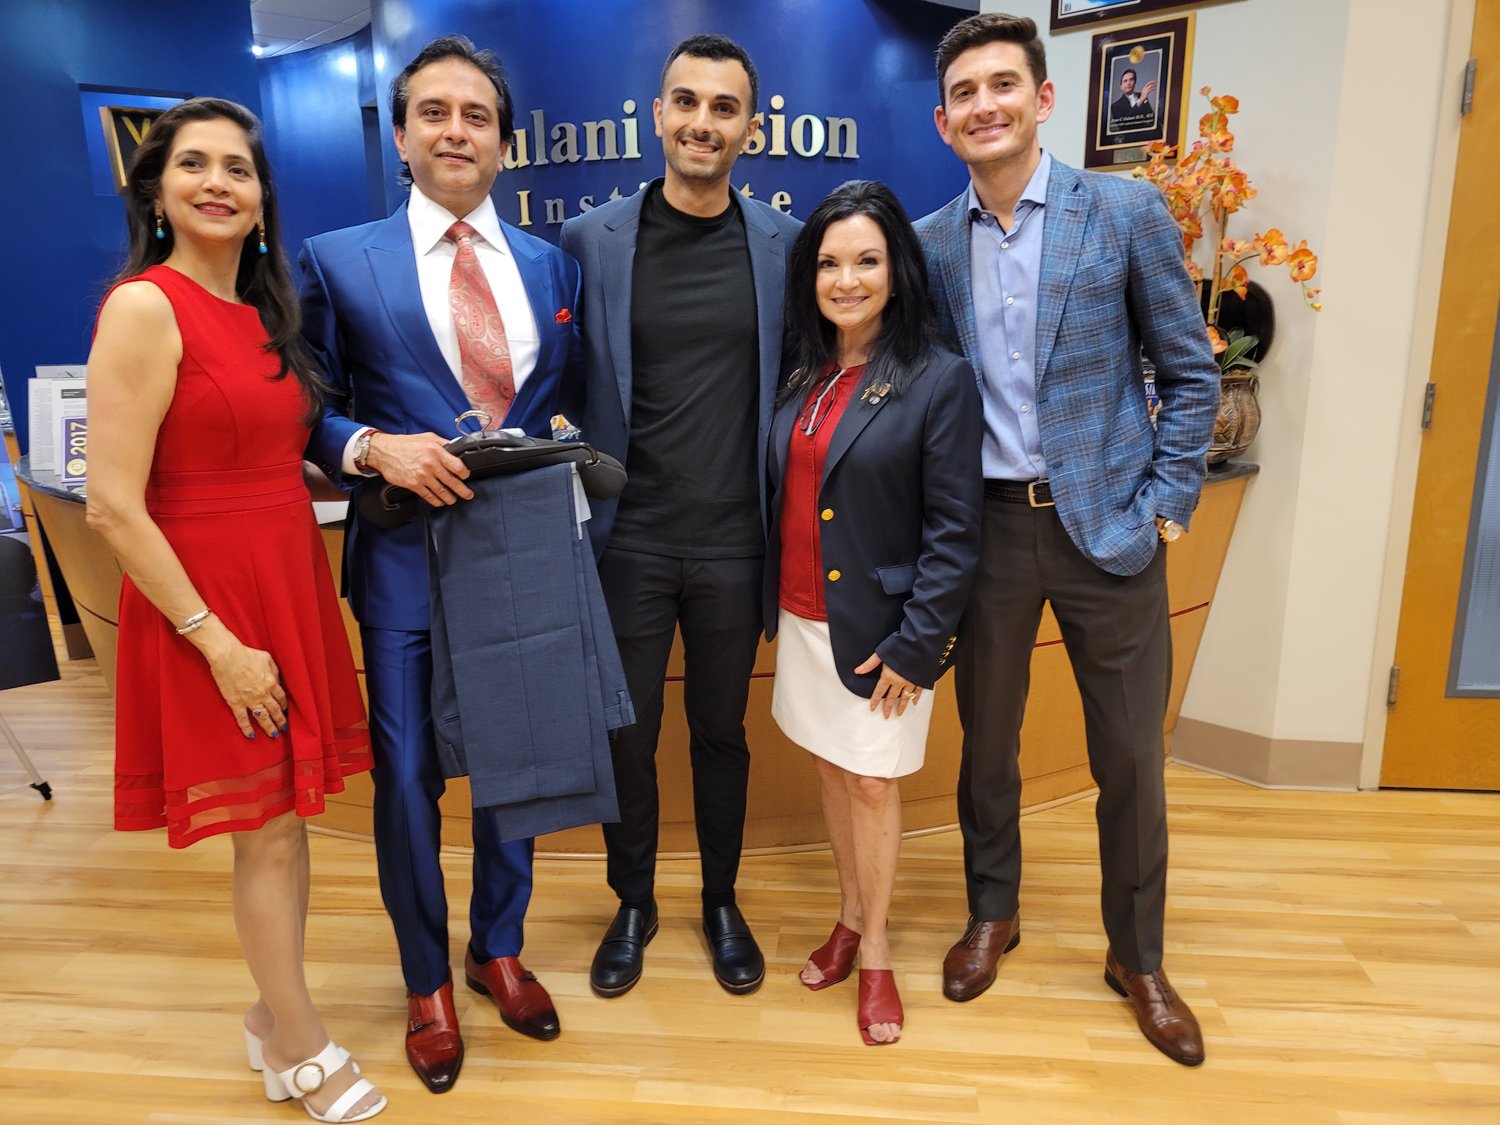 The Cultural Center at Ponte Vedra Beach in partnership with the Gulani Vision Institute donated suits to local U.S. veteran organizations, individuals and artists reentering the workforce. Attorney Chris Wynne purchased special suit for Lee Giat. Pictured from left are Dr. Suparna Gulani; Dr. Arun Gulani; Giat; Donna Guzzo, Cultural Center president and executive director; and Wynne.